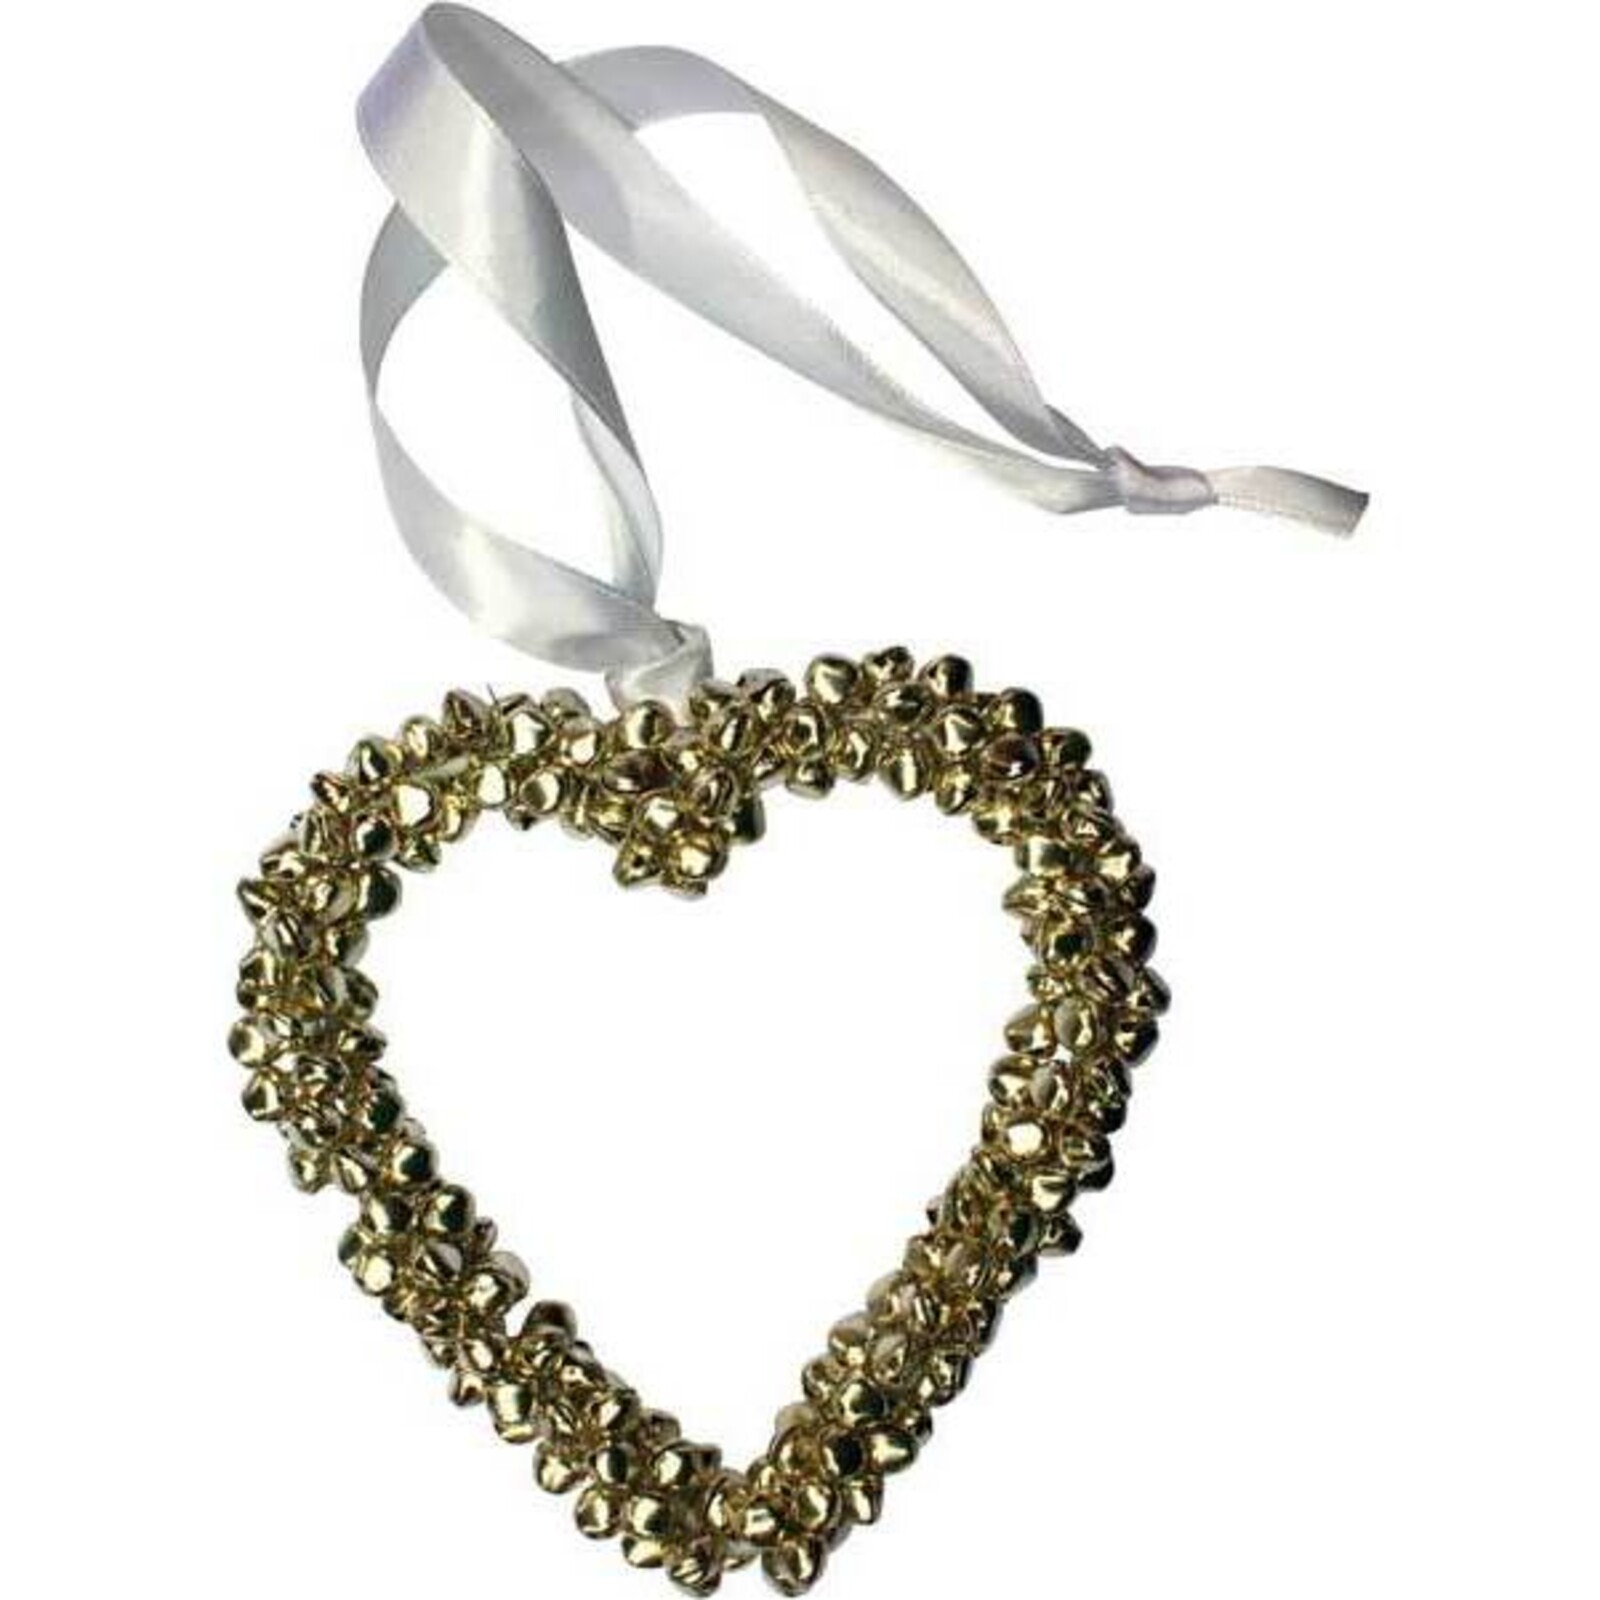 Hanging Heart Shiny Silver Med